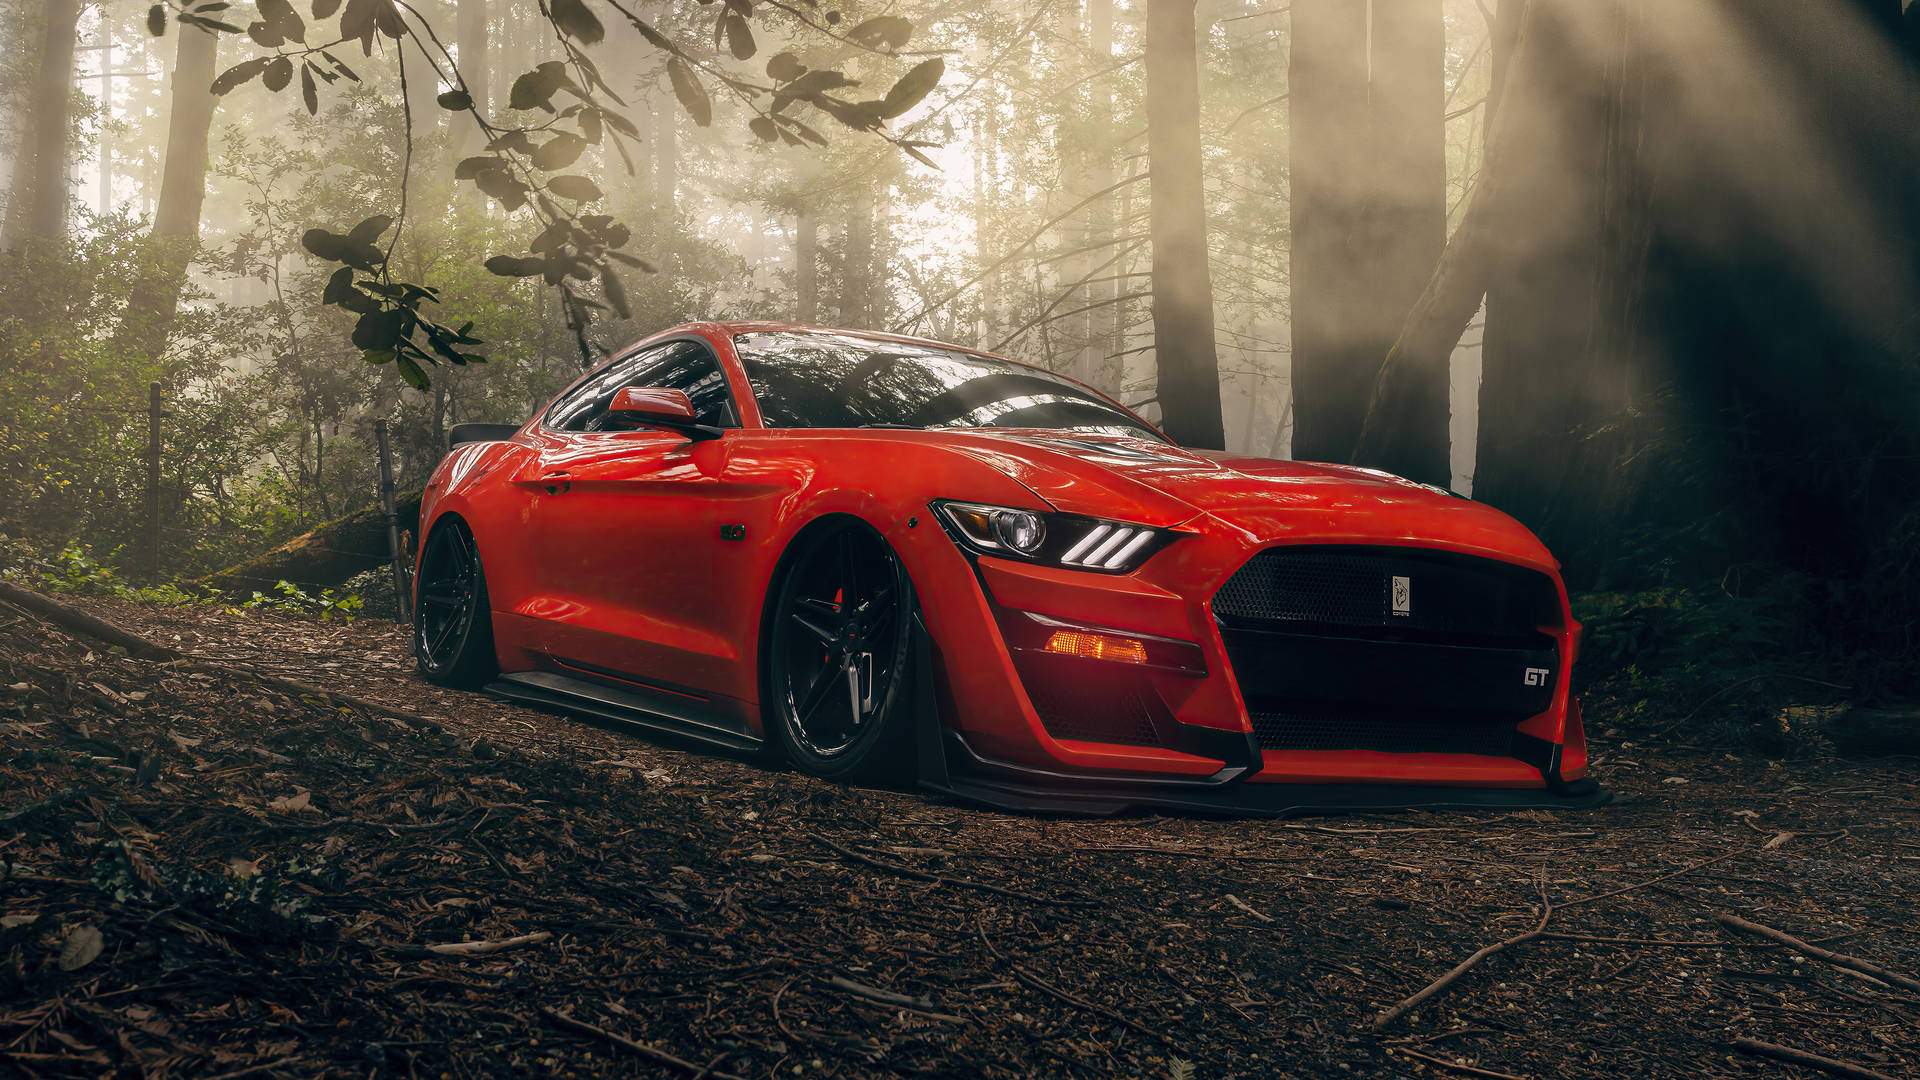 Cool Mustang In Forest Wallpaper